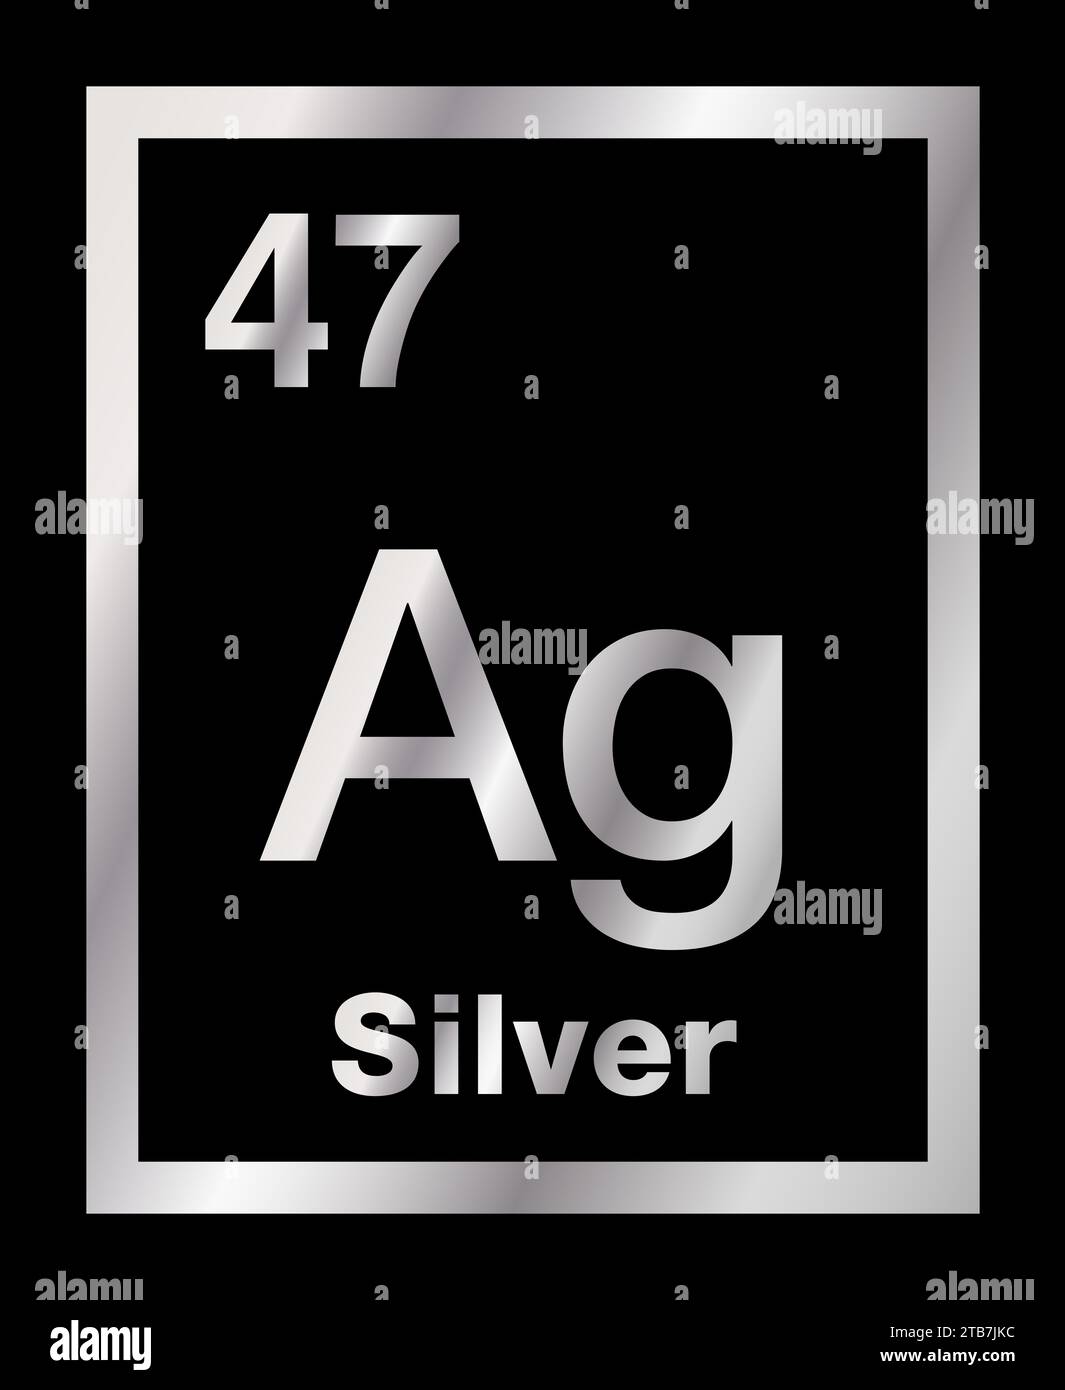 Silver, chemical element, taken from periodic table, with gradients and on black background. Noble and precious metal with chemical symbol Ag. Stock Photo